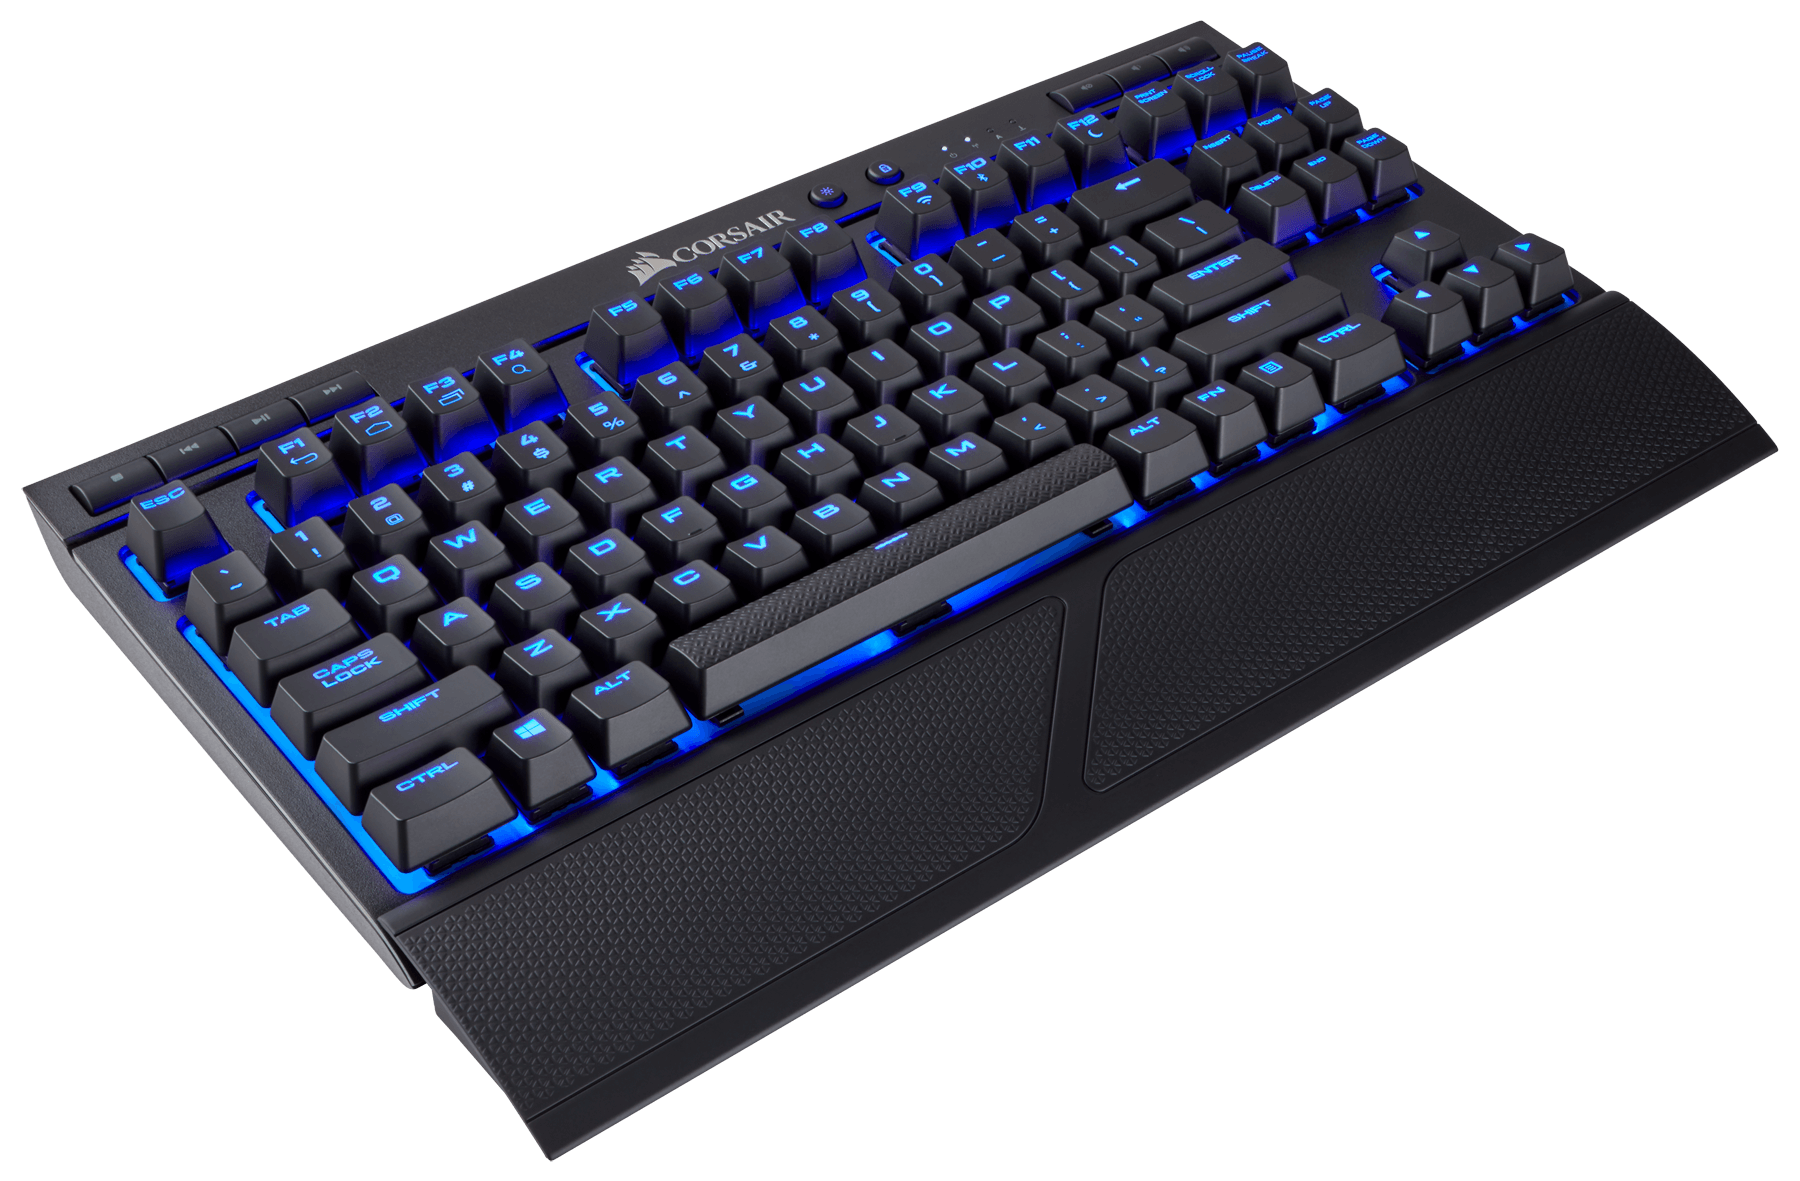 corsair-shows-off-their-latest-wireless-keyboard-and-mouse